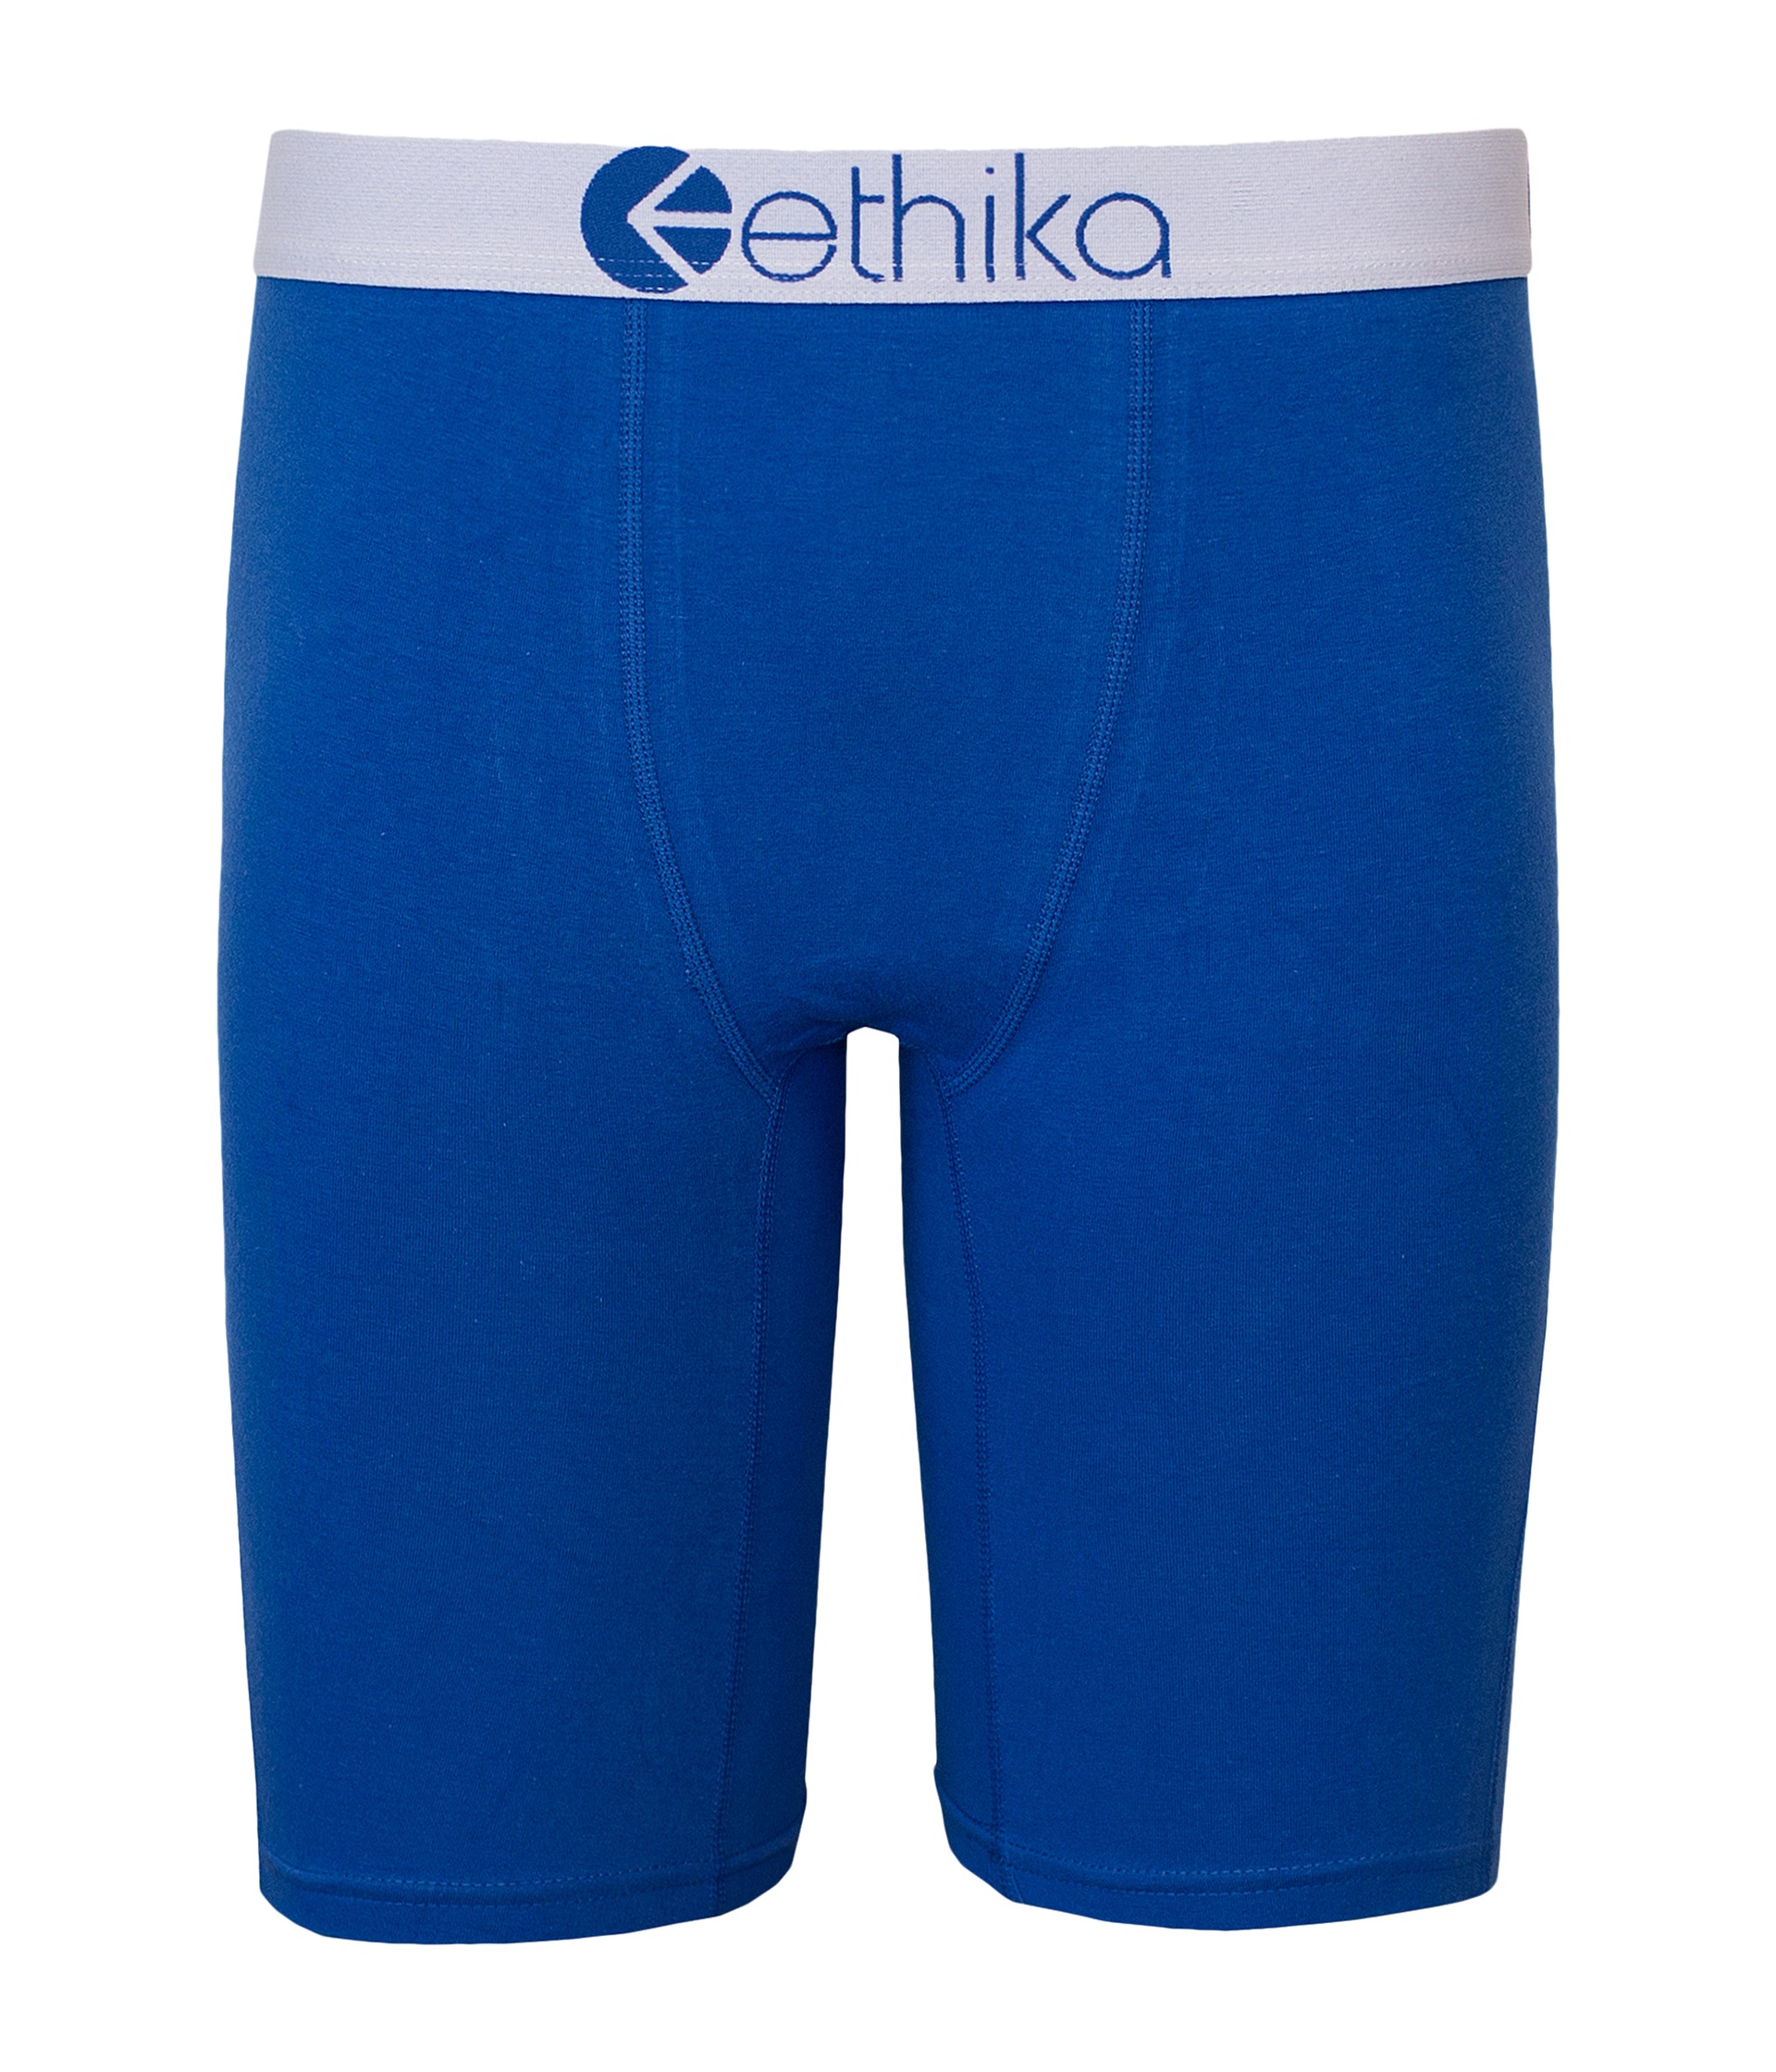 ethika The Staple - Blue and White Boxer Brief at Zappos.com